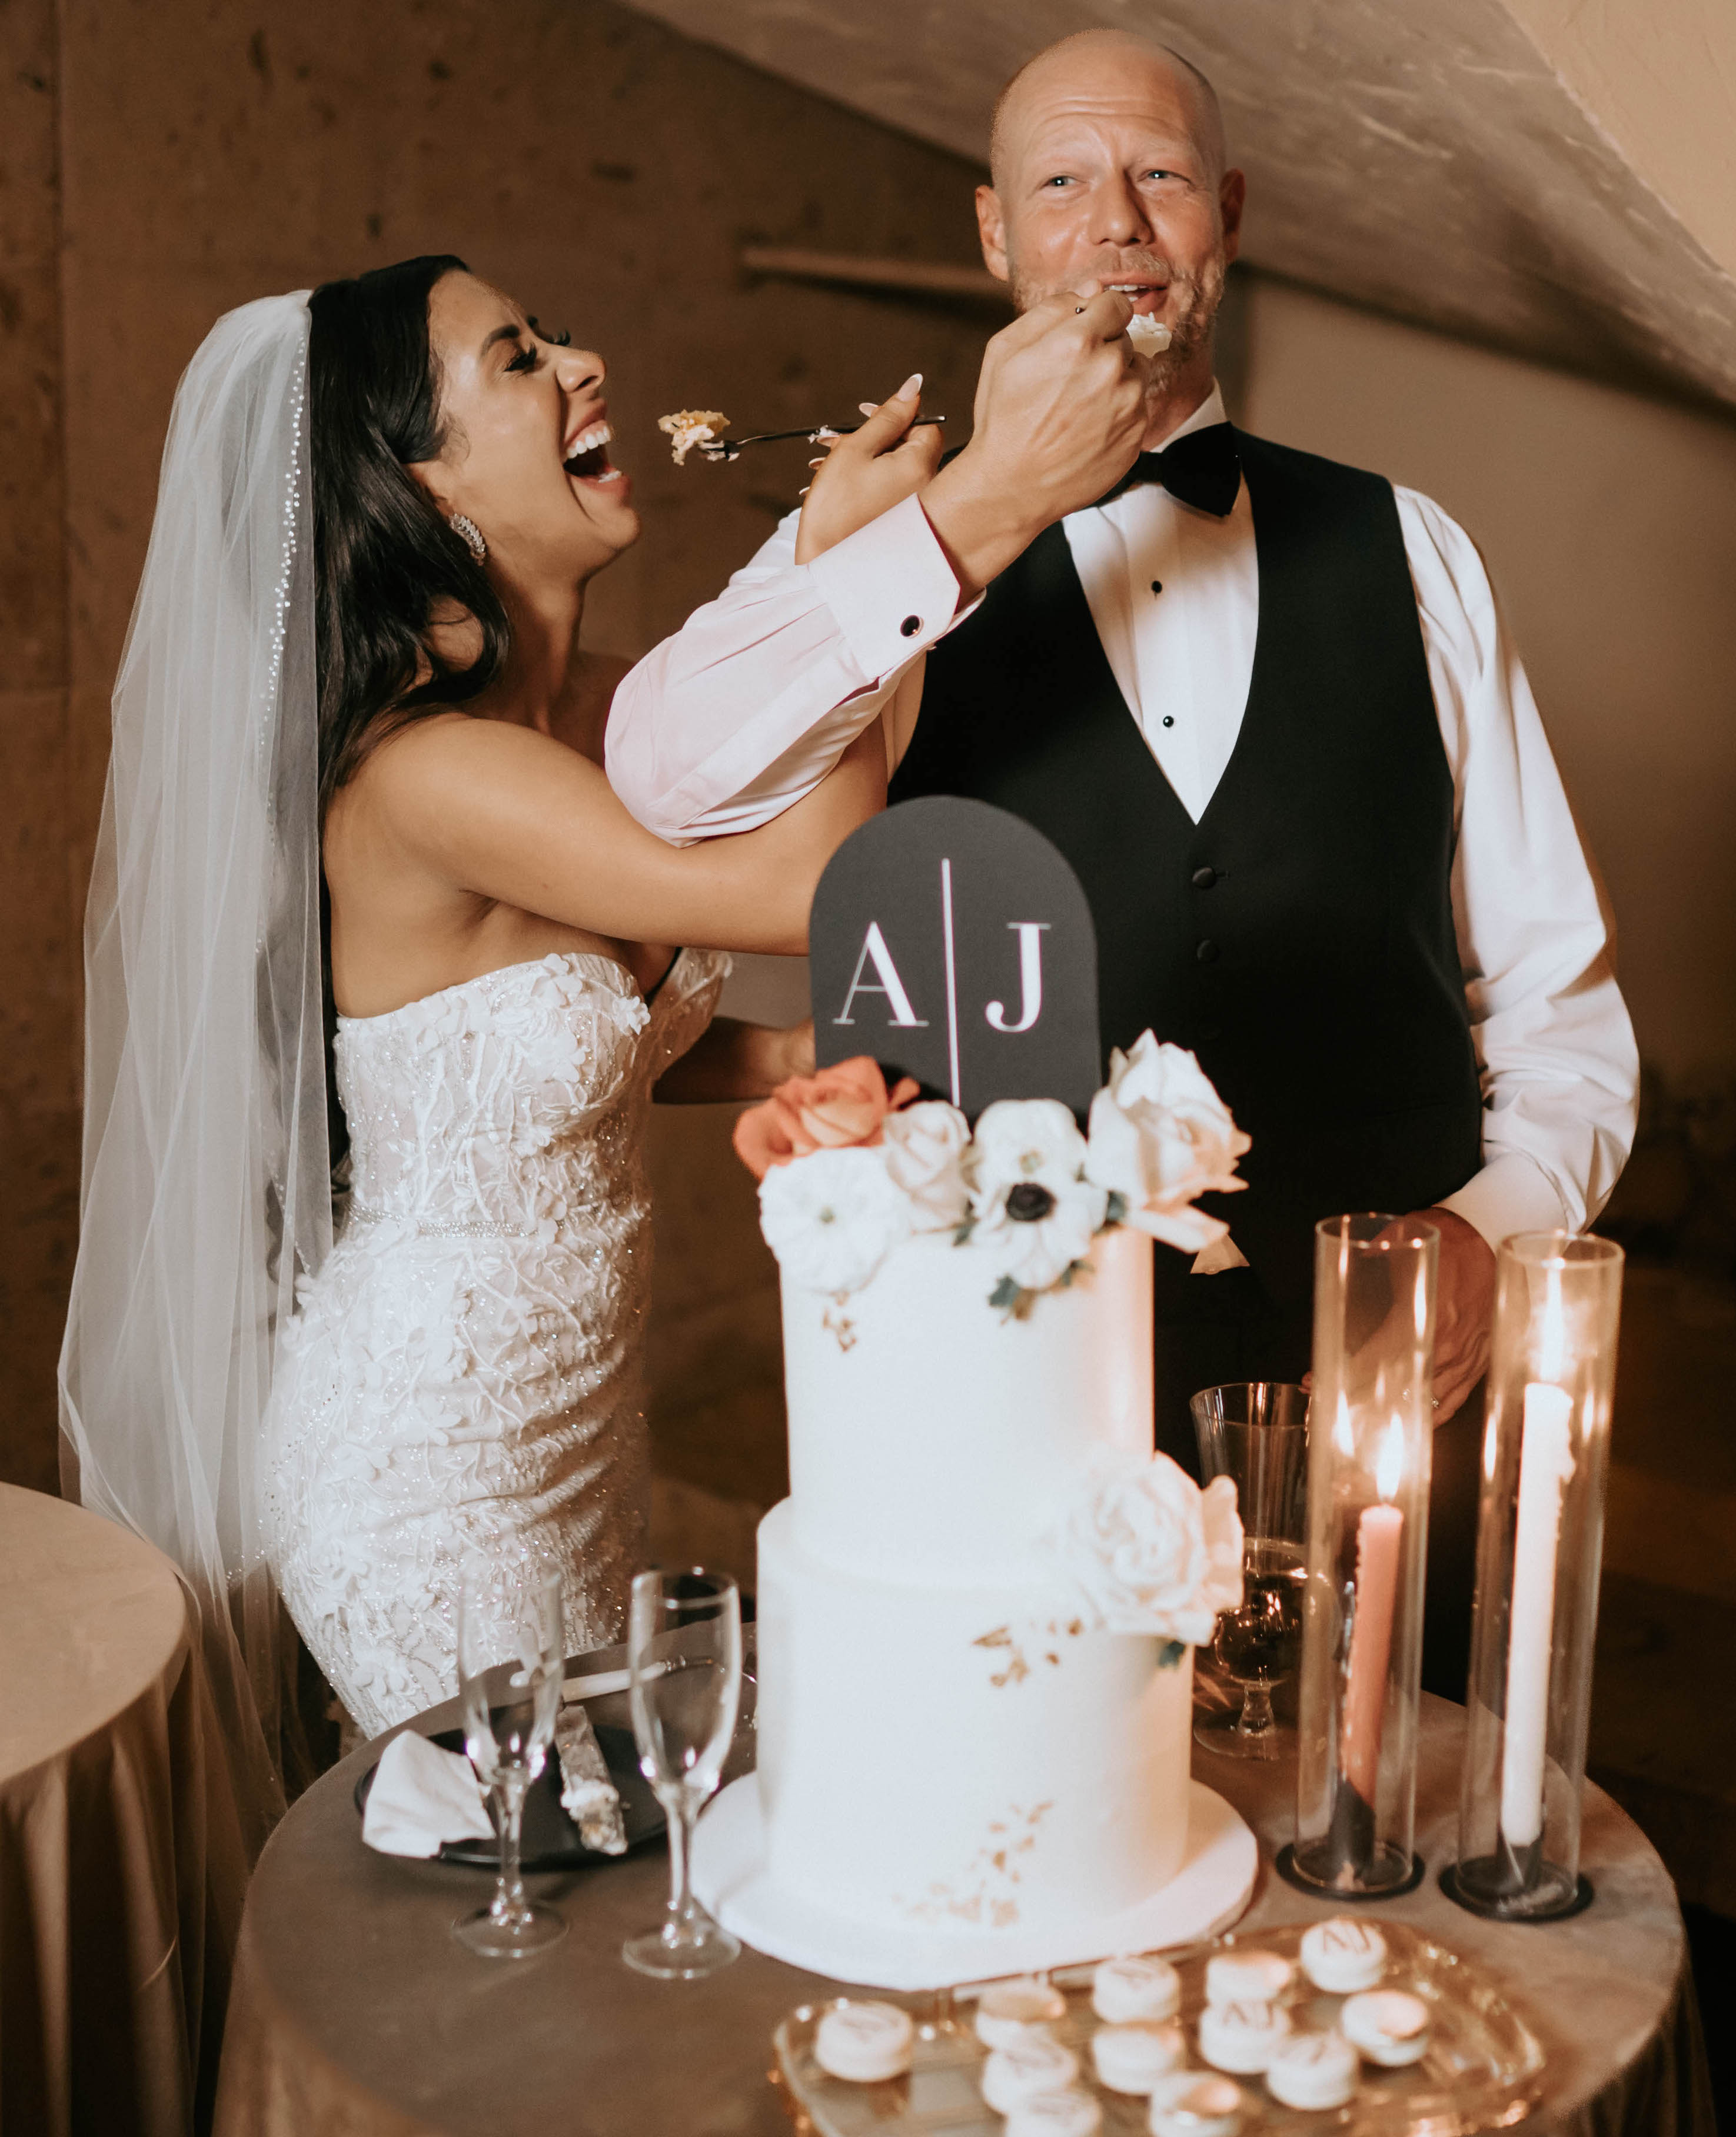 A bride and groom give each other a bite of their wedding cake at their earth-toned wedding at The Bell Tower on 34th in Houston, TX.